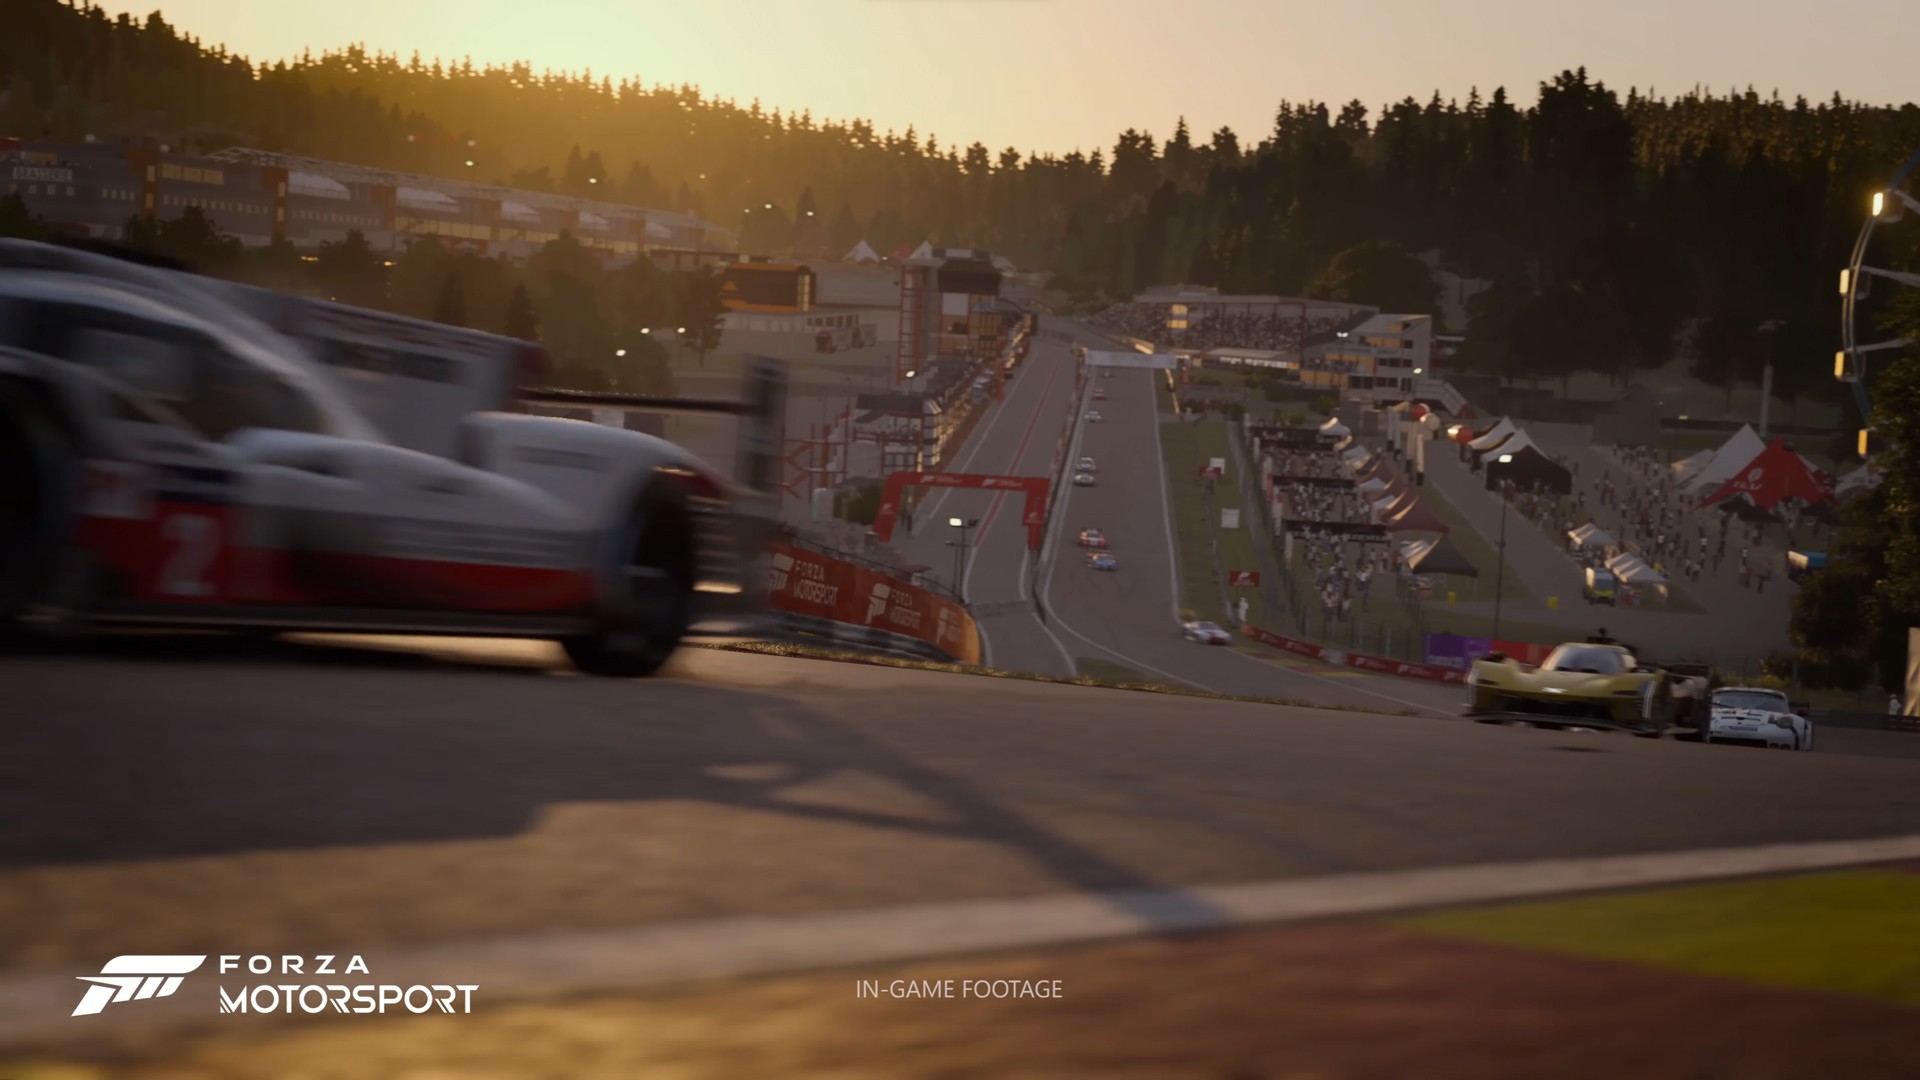 Forza Motorsport on X: With #ForzaMotorsport launching in less than a  month, Chris Esaki put together our latest blog to give you a preview of  what's to come. See you at the